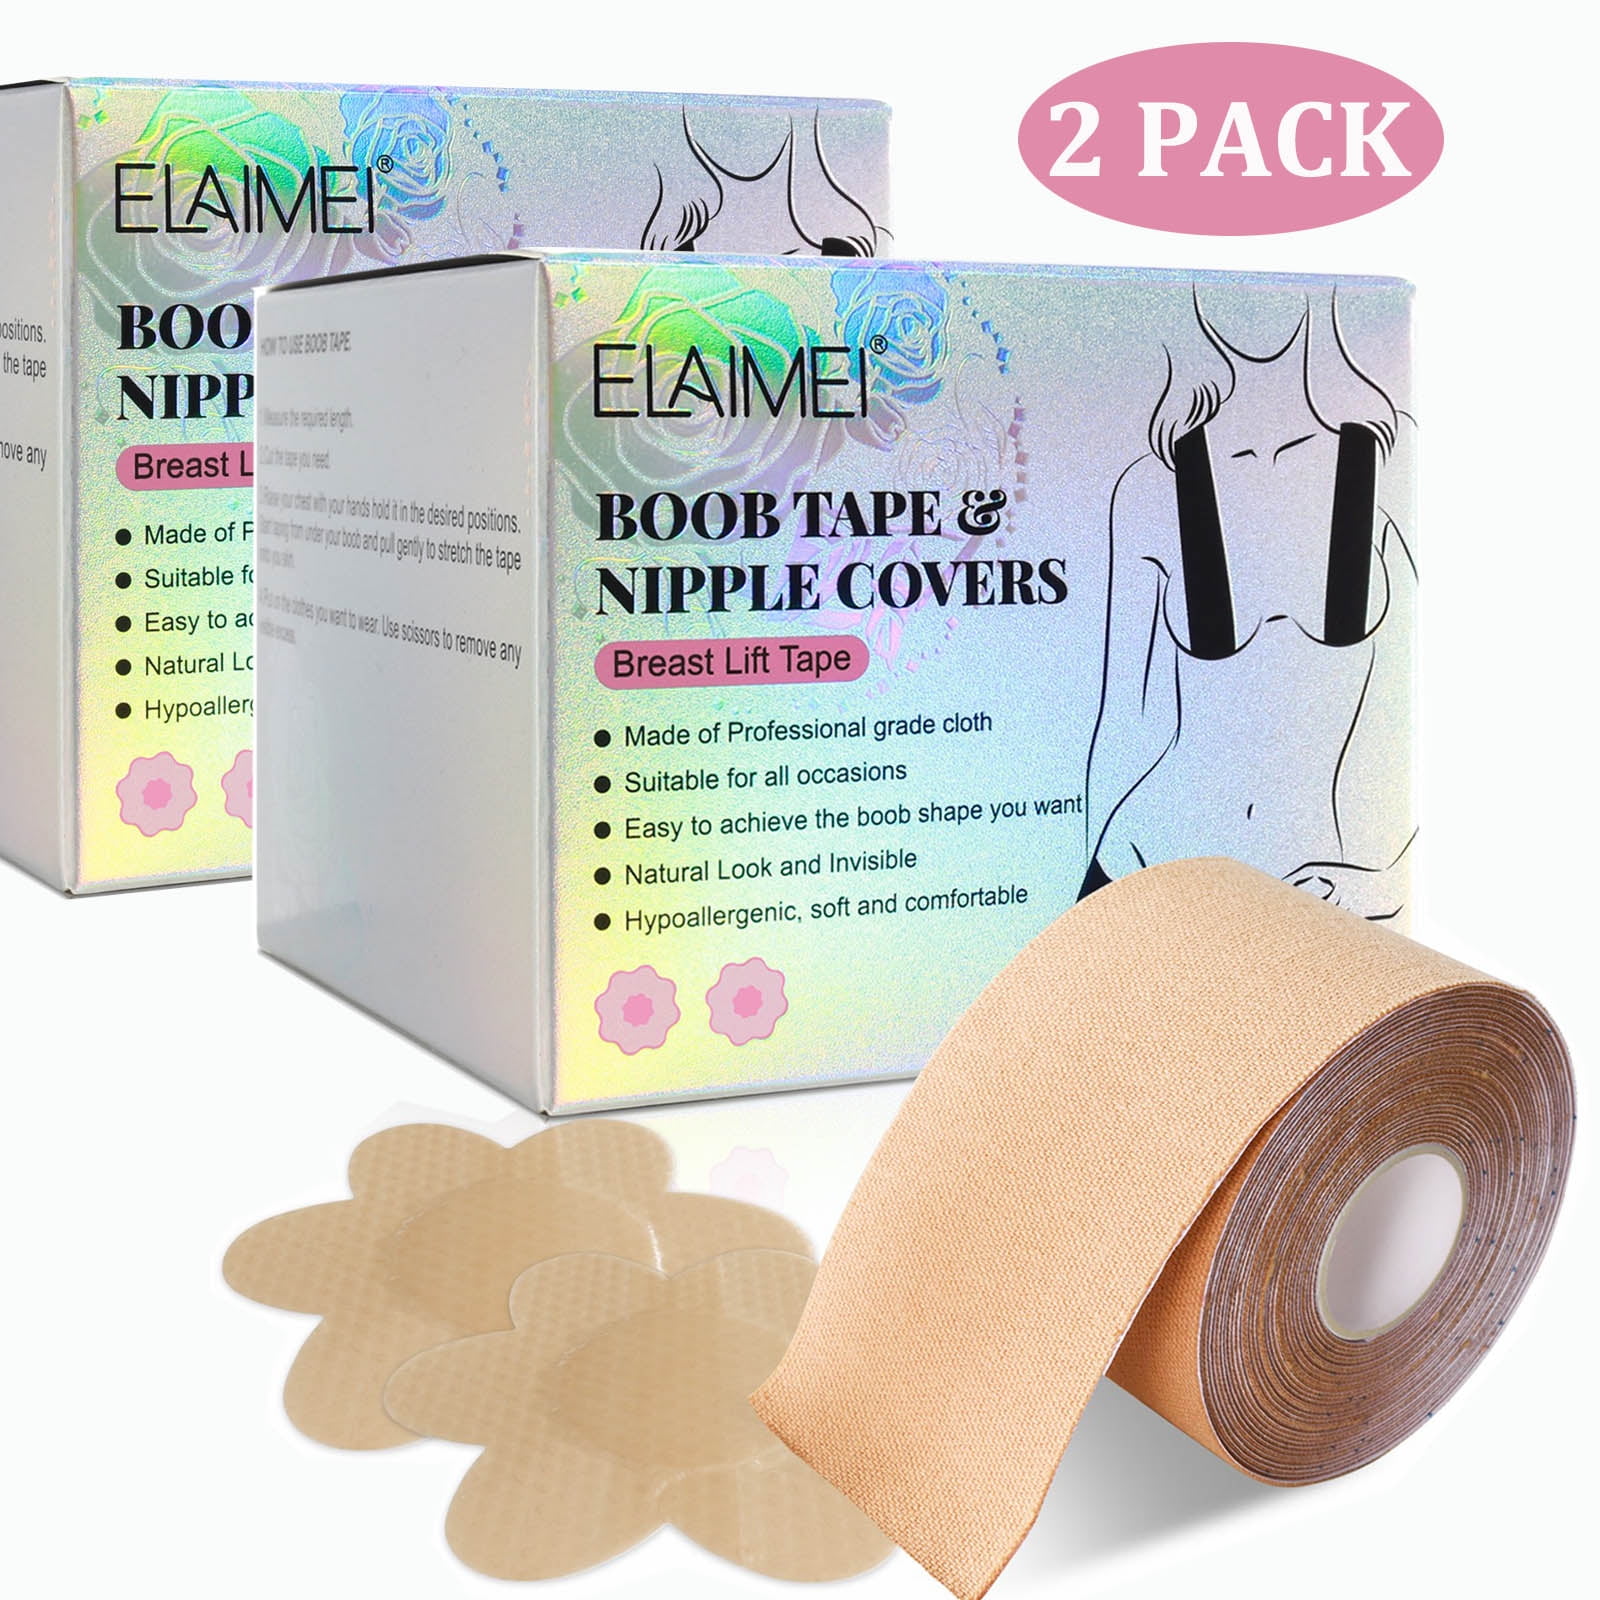 VBT 2 Pack Boob Tape - Breast Lift Tape, Body Tape for Breast Lift w 2 Pcs  Silicone Breast Reusable Adhesive Bra& 2 Pcs Fabric Nipple Covers, Bob Tape